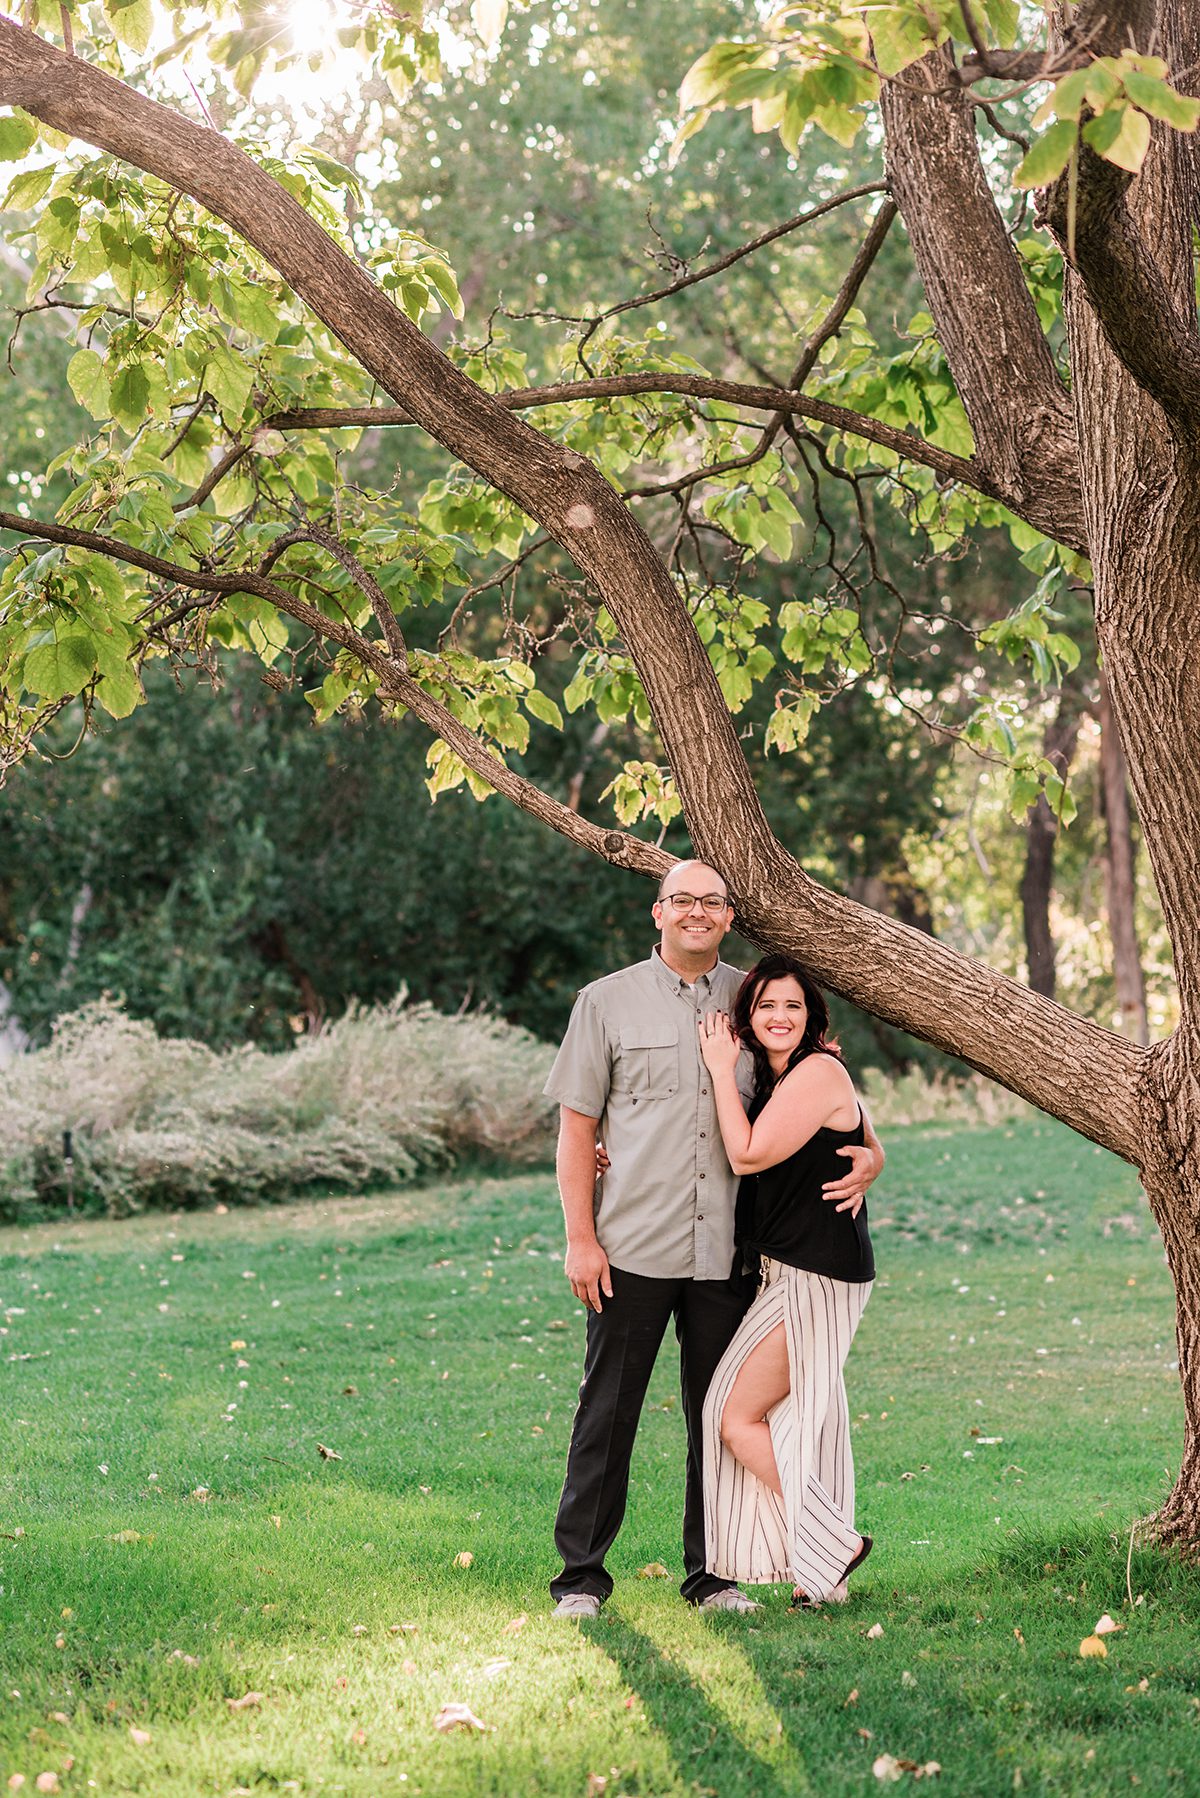 Jesse & Tabitha | Family and Couples Photos in Palisade